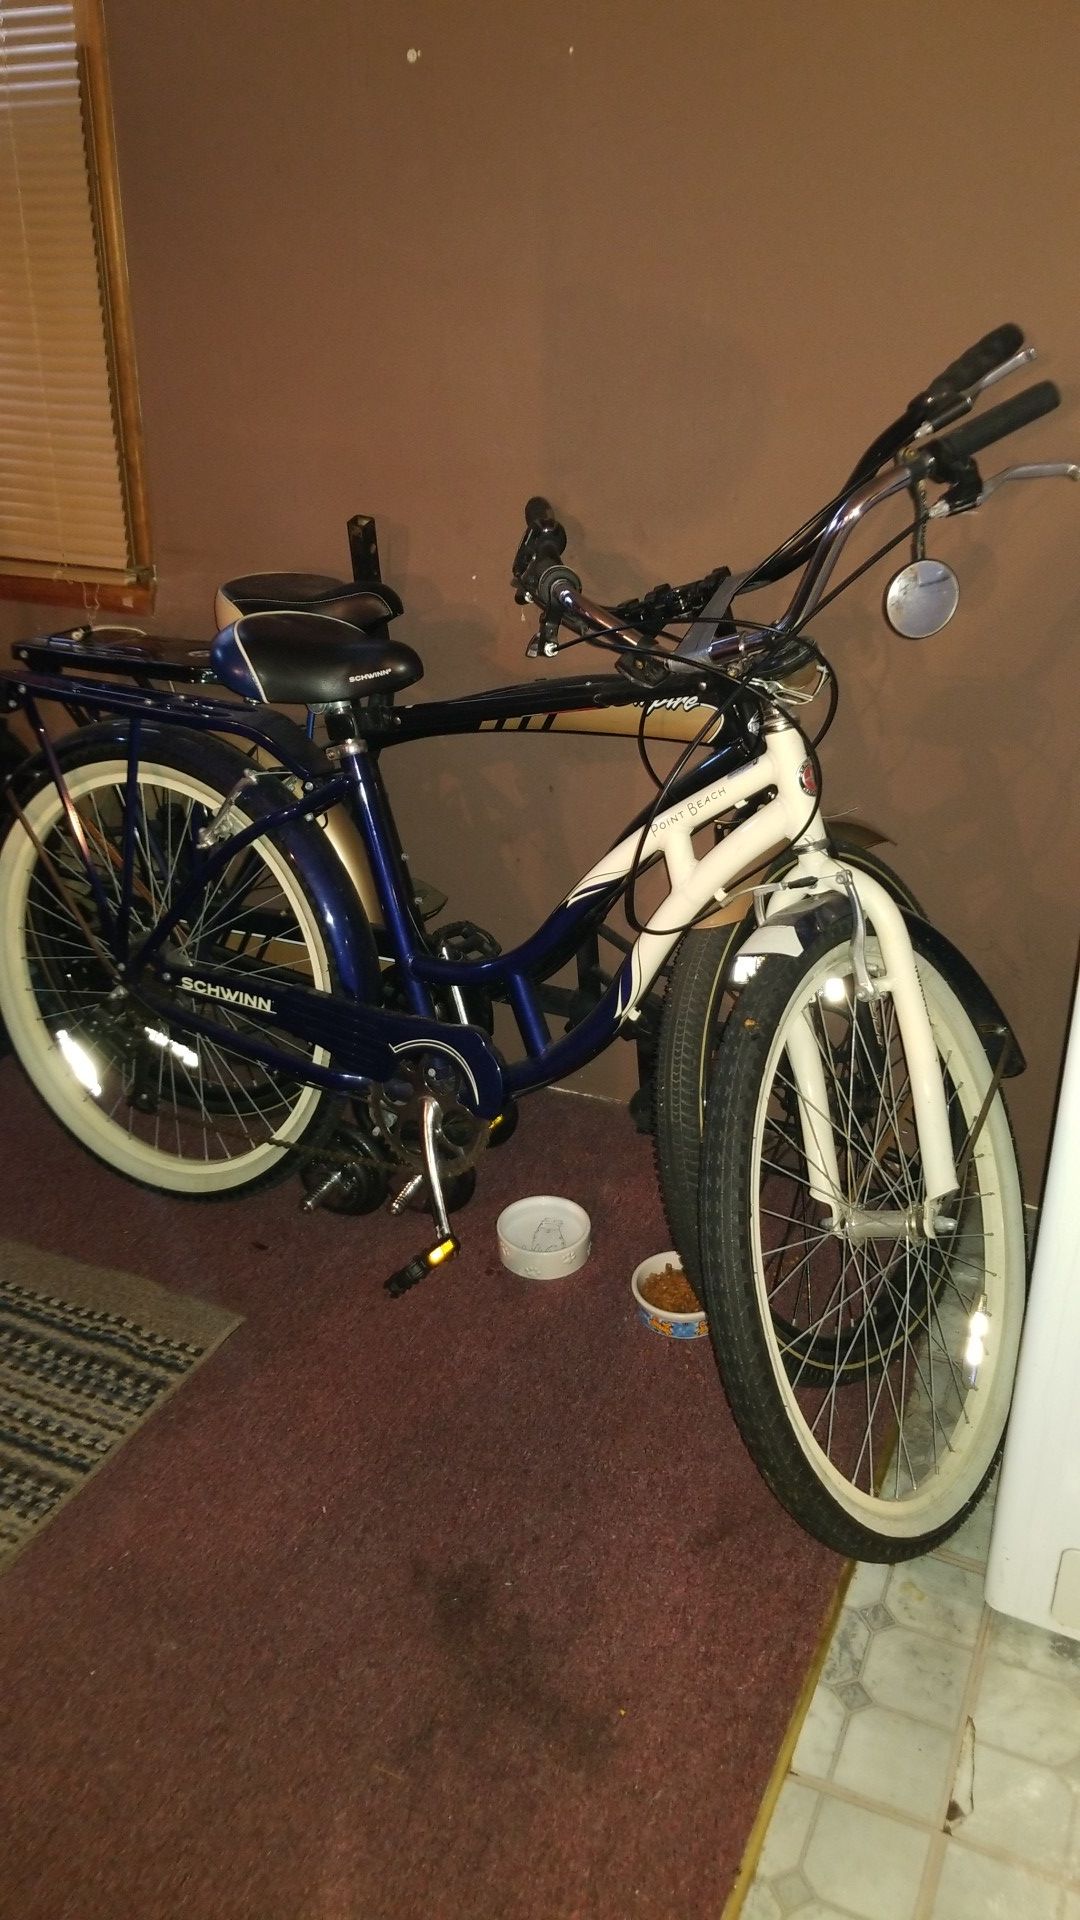 2 bikes. Mens and women's. With tow-hitch bike rack and saddle bag